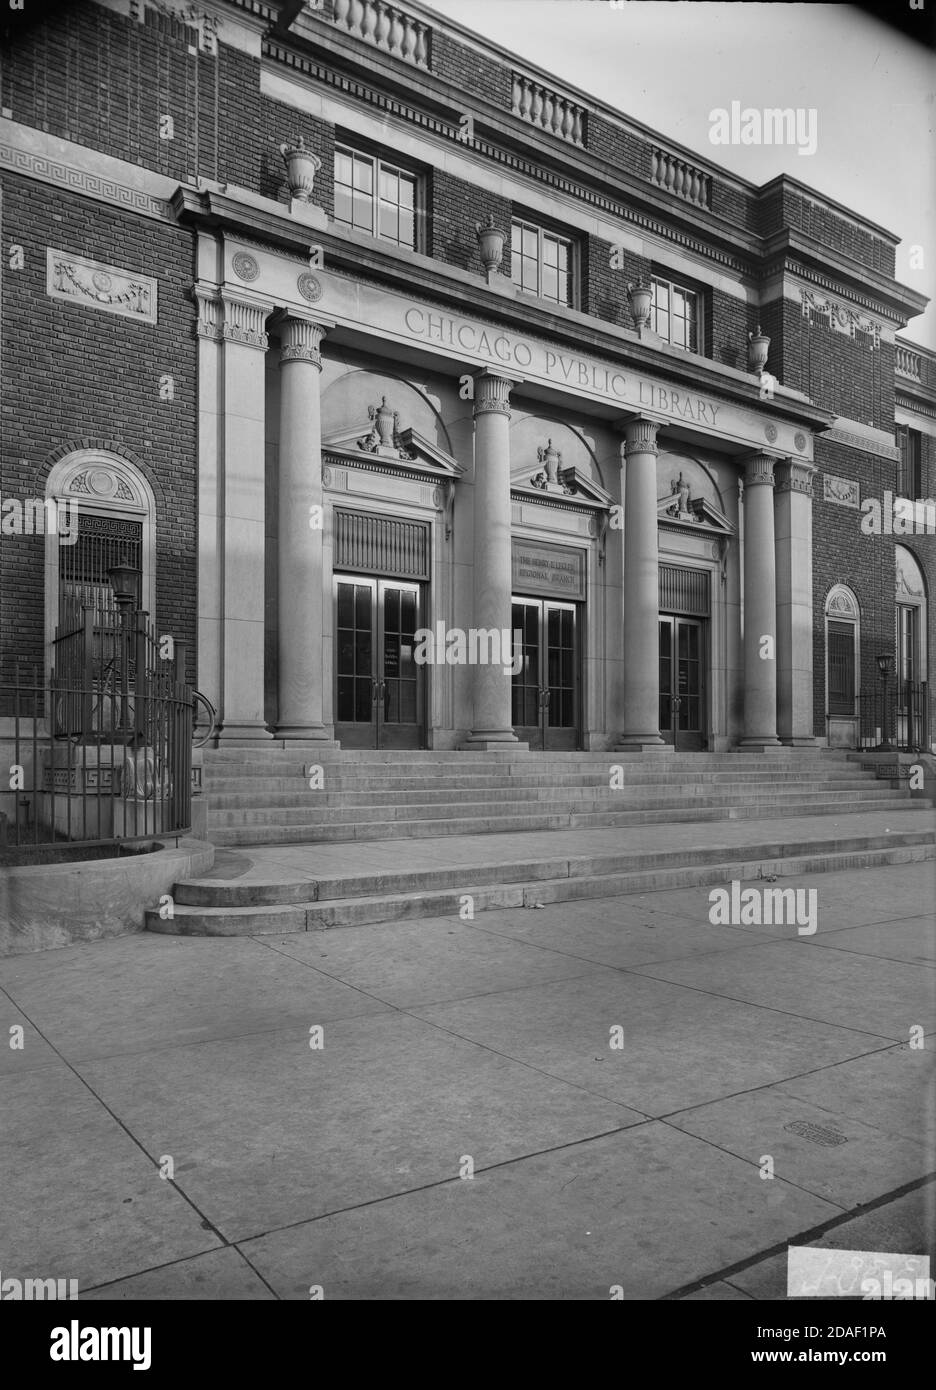 Detail of main entrance to Chicago Public Library branch, architect Alfred Alschuler, circa 1923-1936. Stock Photo